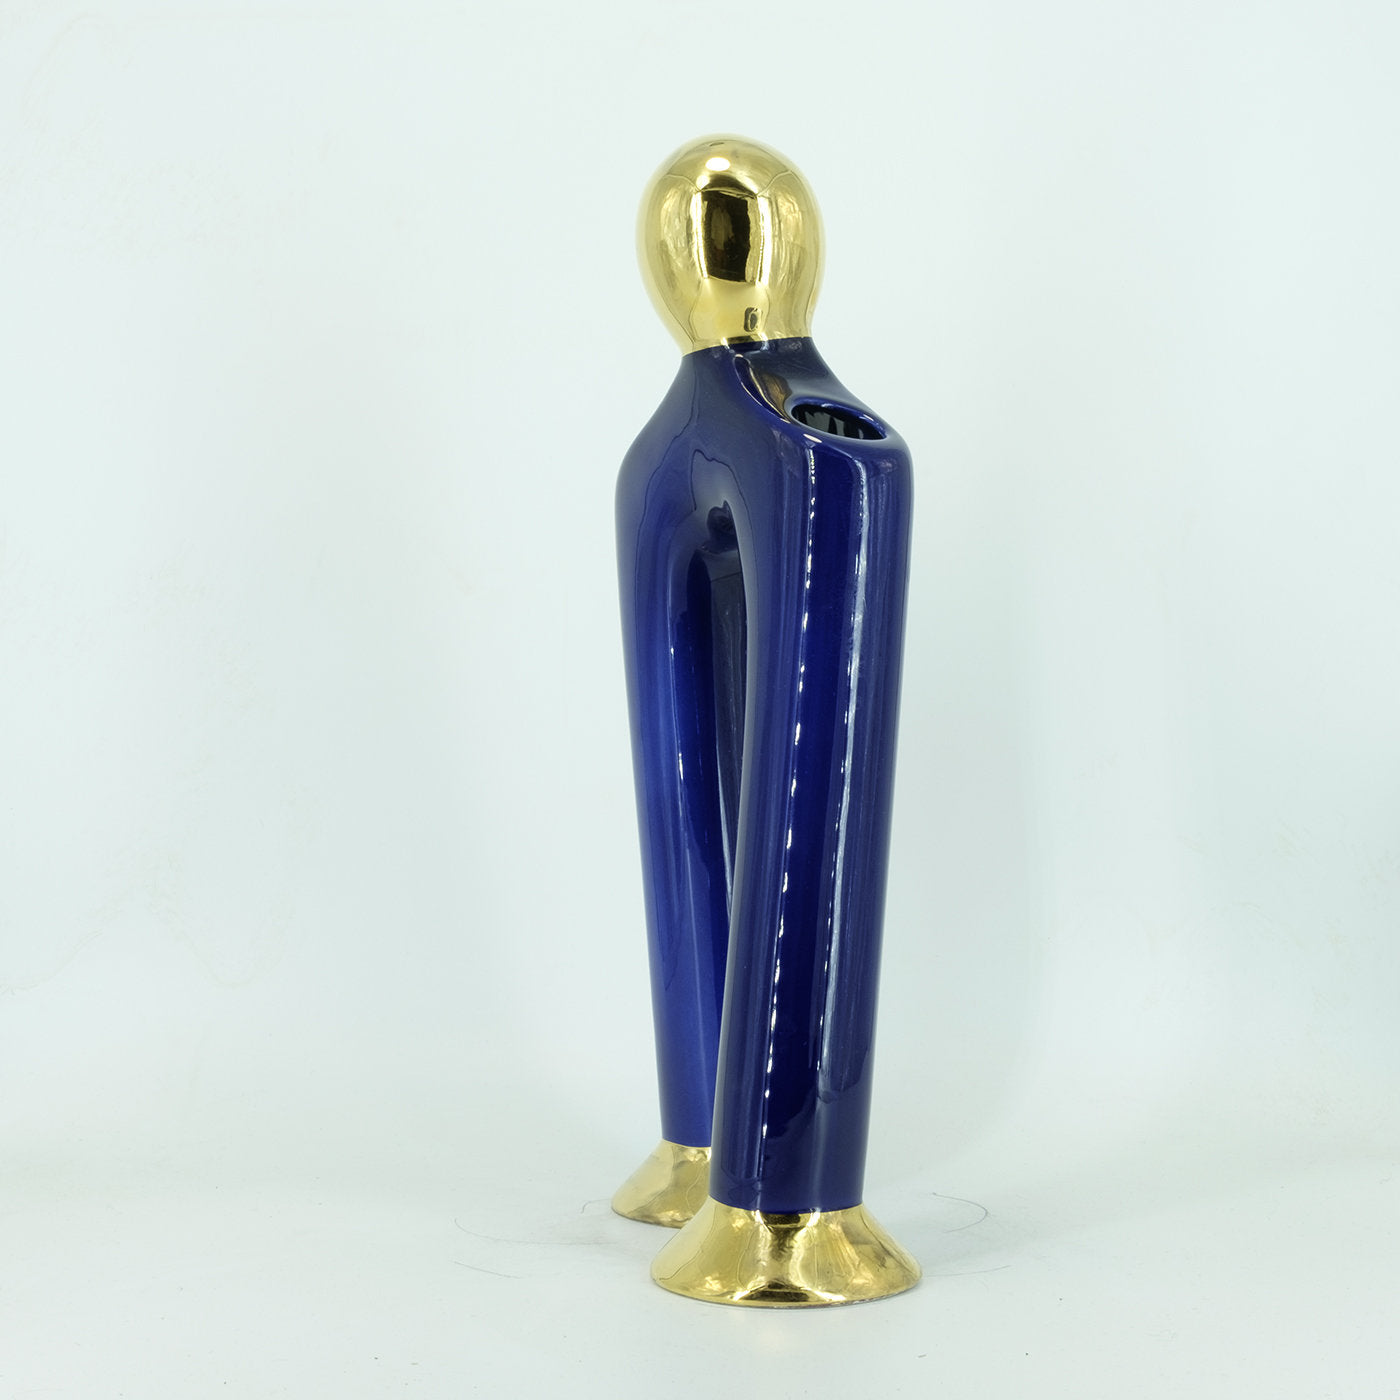 Mino Blue and Gold Vase - Alternative view 1